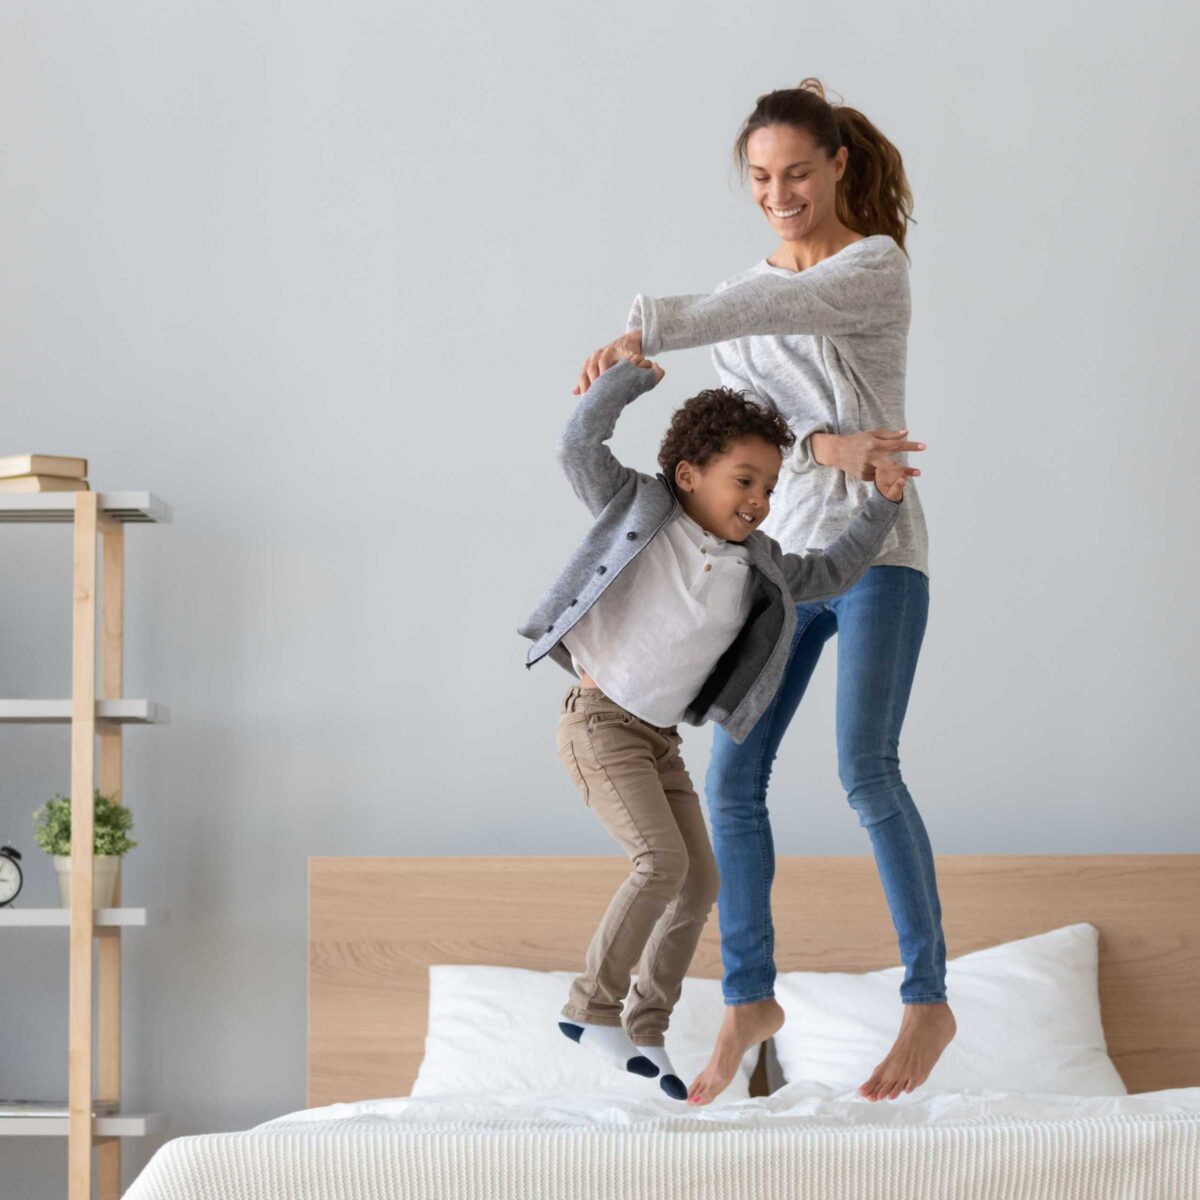 Moms Should be Able to Jump by Elmira Family Chiropractic